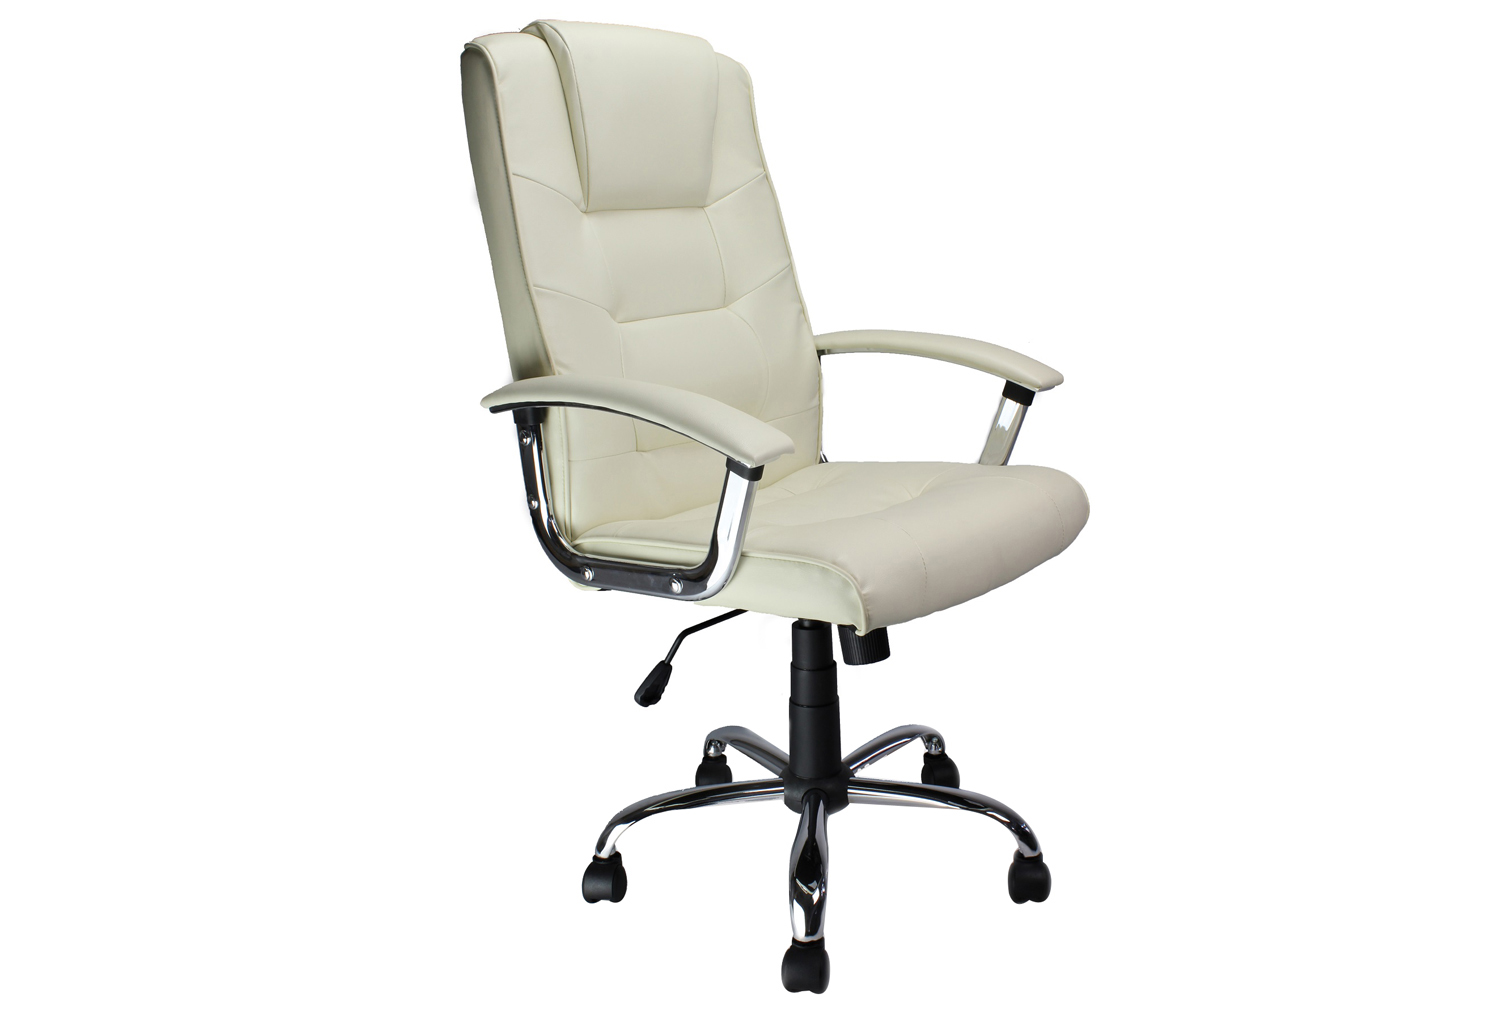 Skye High Back Cream Leather Faced Executive Office Chair, Cream, Fully Installed